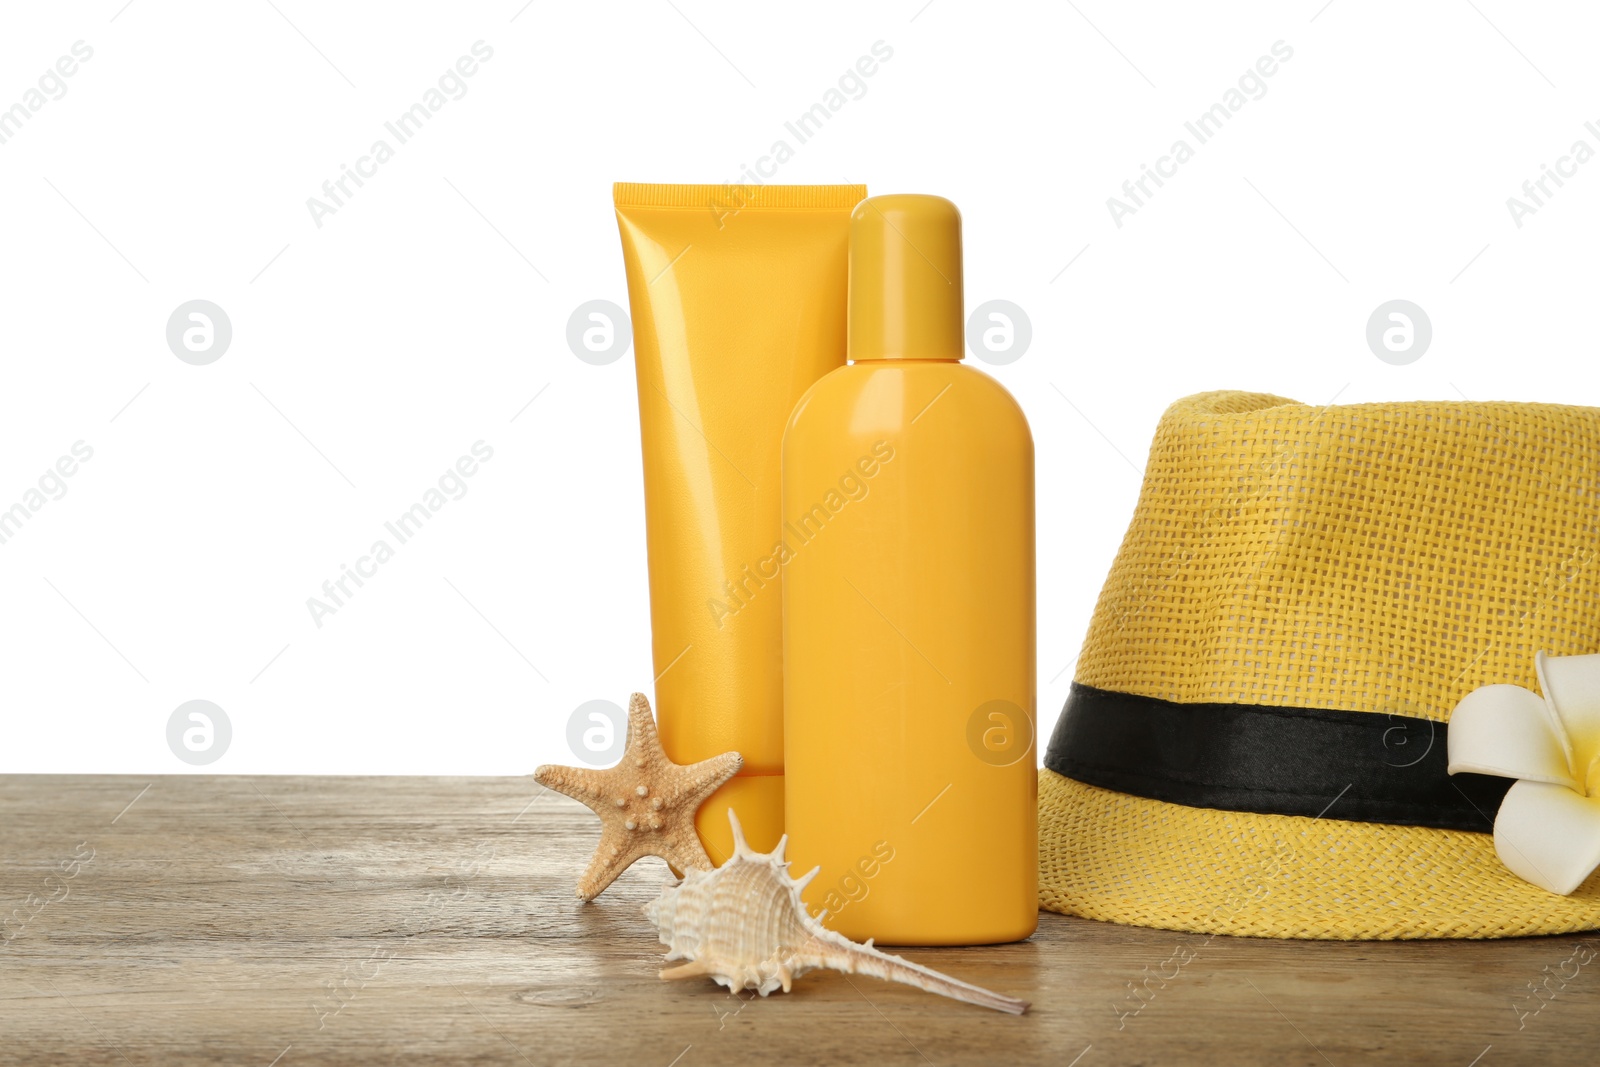 Photo of Sun protection products and beach accessories on wooden table